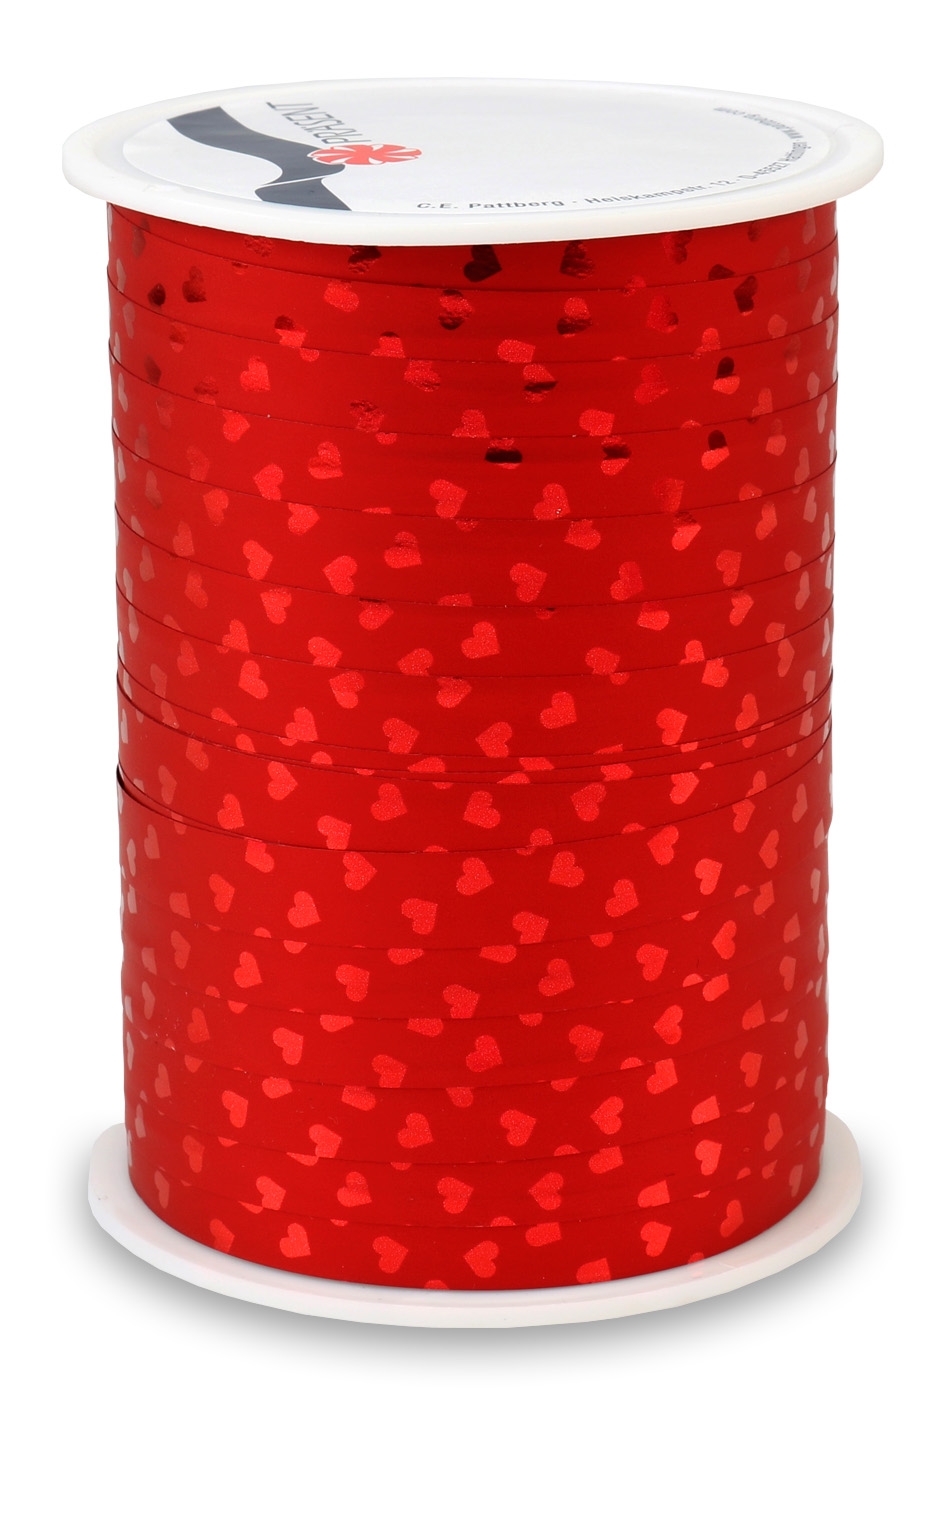 Picture of Rol krullint 10 mm 100 mtr hartjes rood/rood